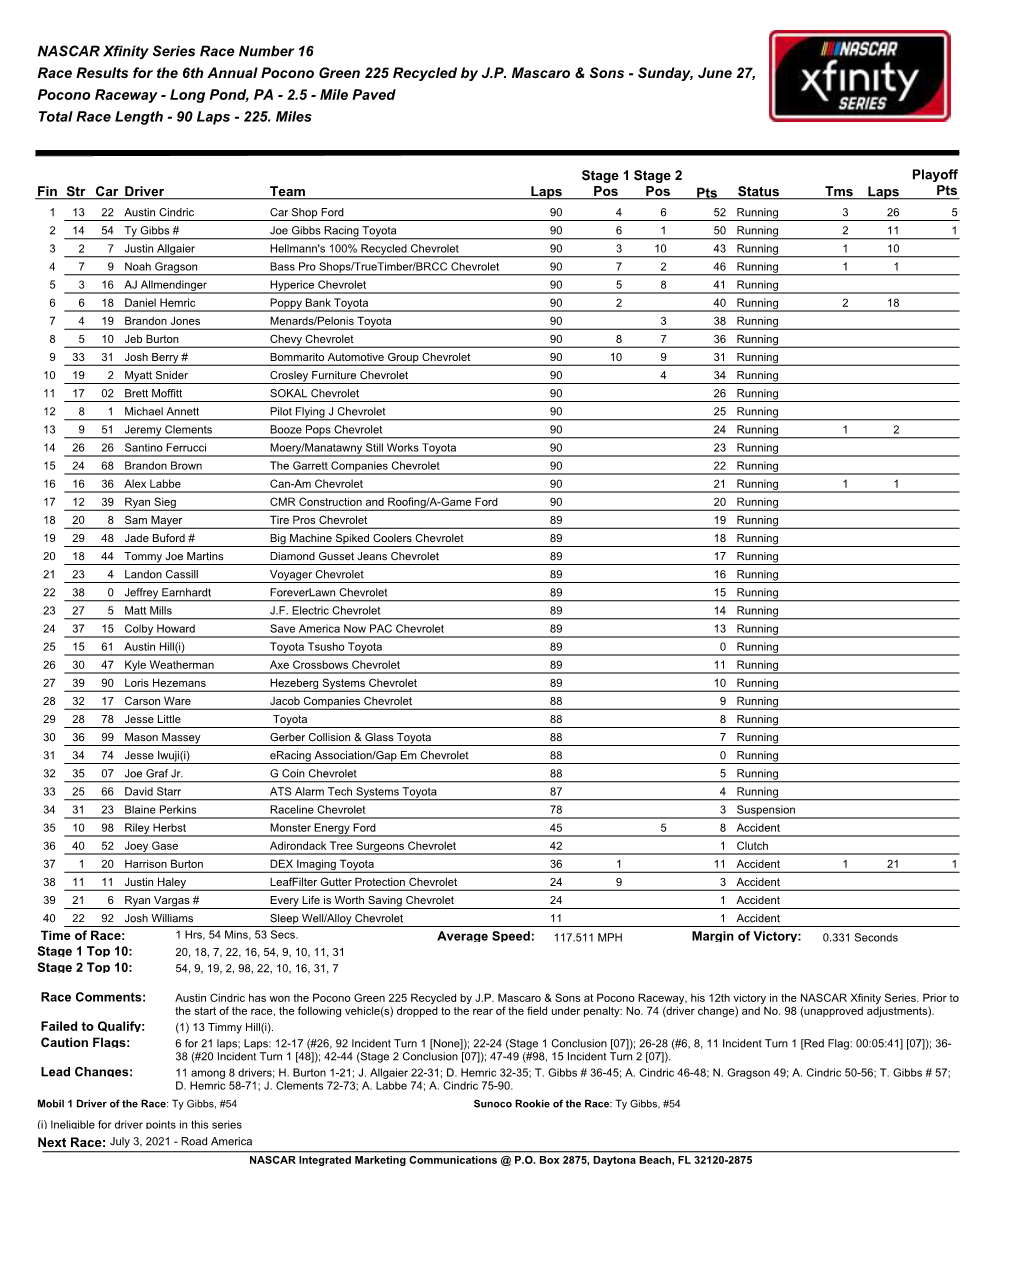 NASCAR Xfinity Series Race Number 16 Race Results for the 6Th Annual Pocono Green 225 Recycled by J.P